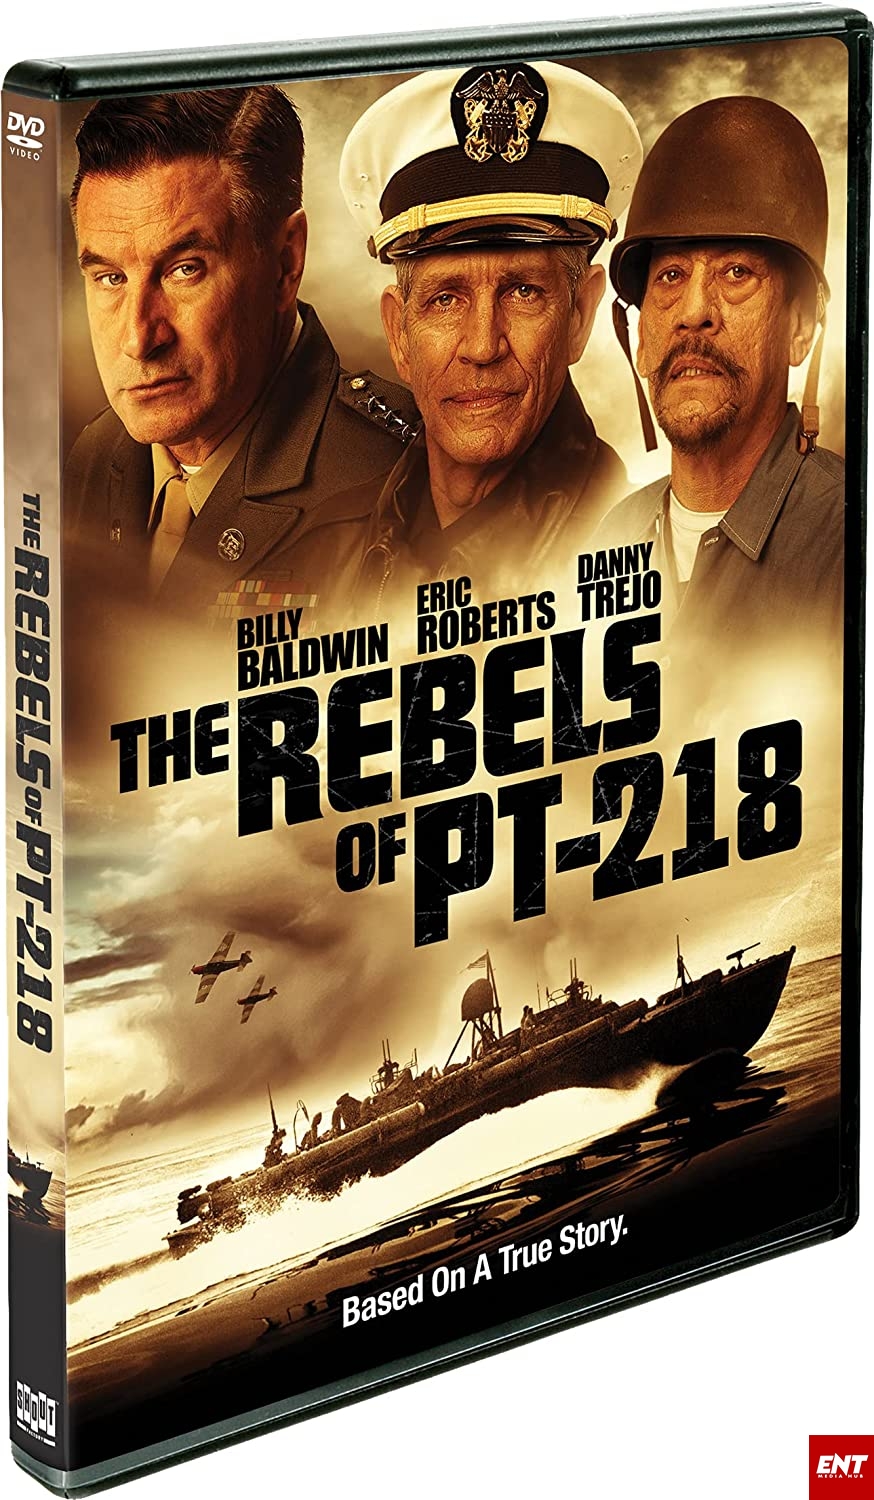 MOVIE : The Rebels of PT-218 (2021)